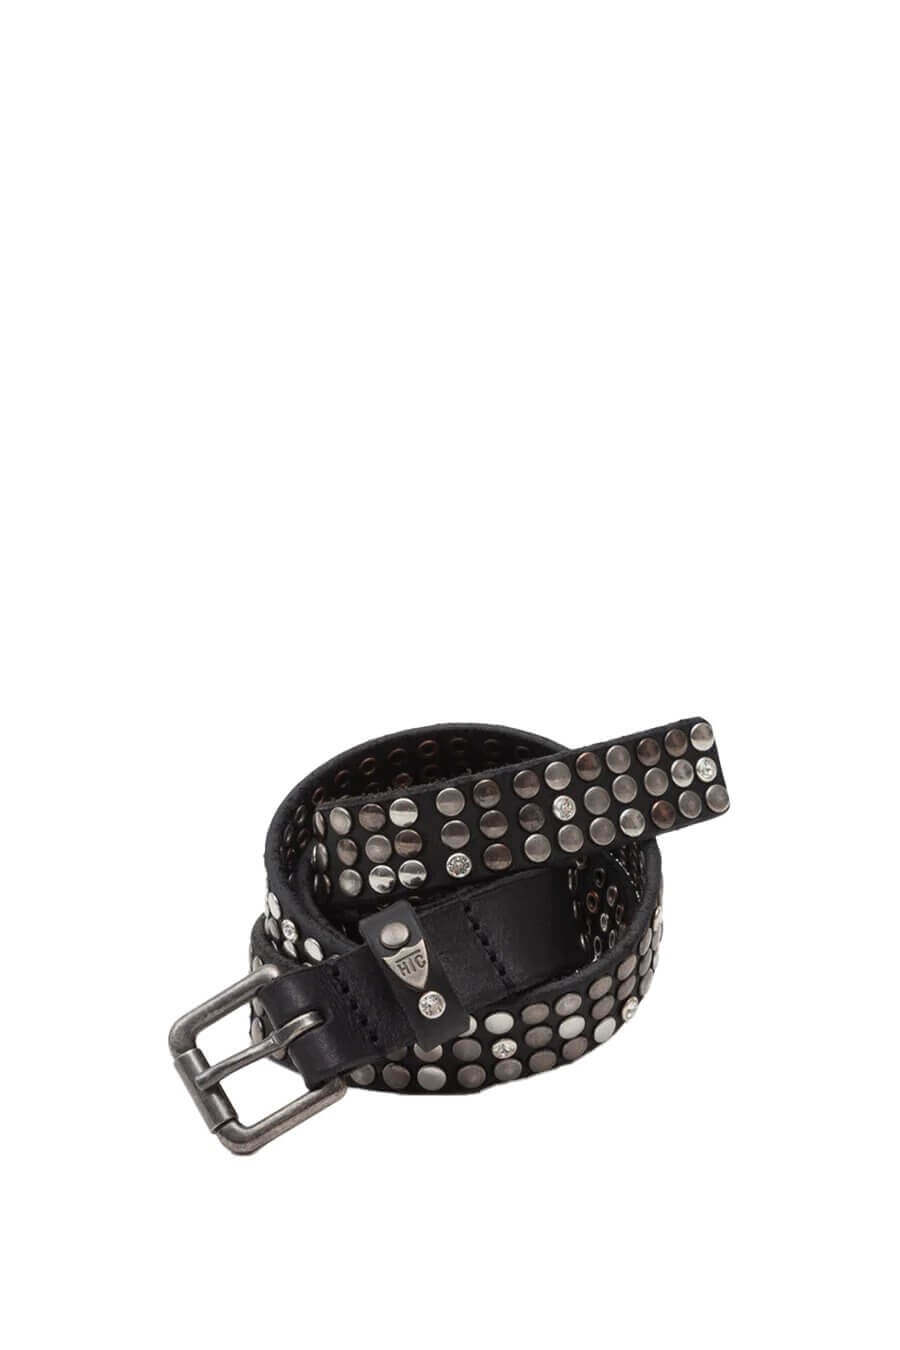 3.000 STUDS DELUXE BELT Black leather belt with studs and rhinestones, brass buckle, studded zamac belt loop and rivet with HTC logo. Height: 2 cm. Made in Italy. HTC LOS ANGELES